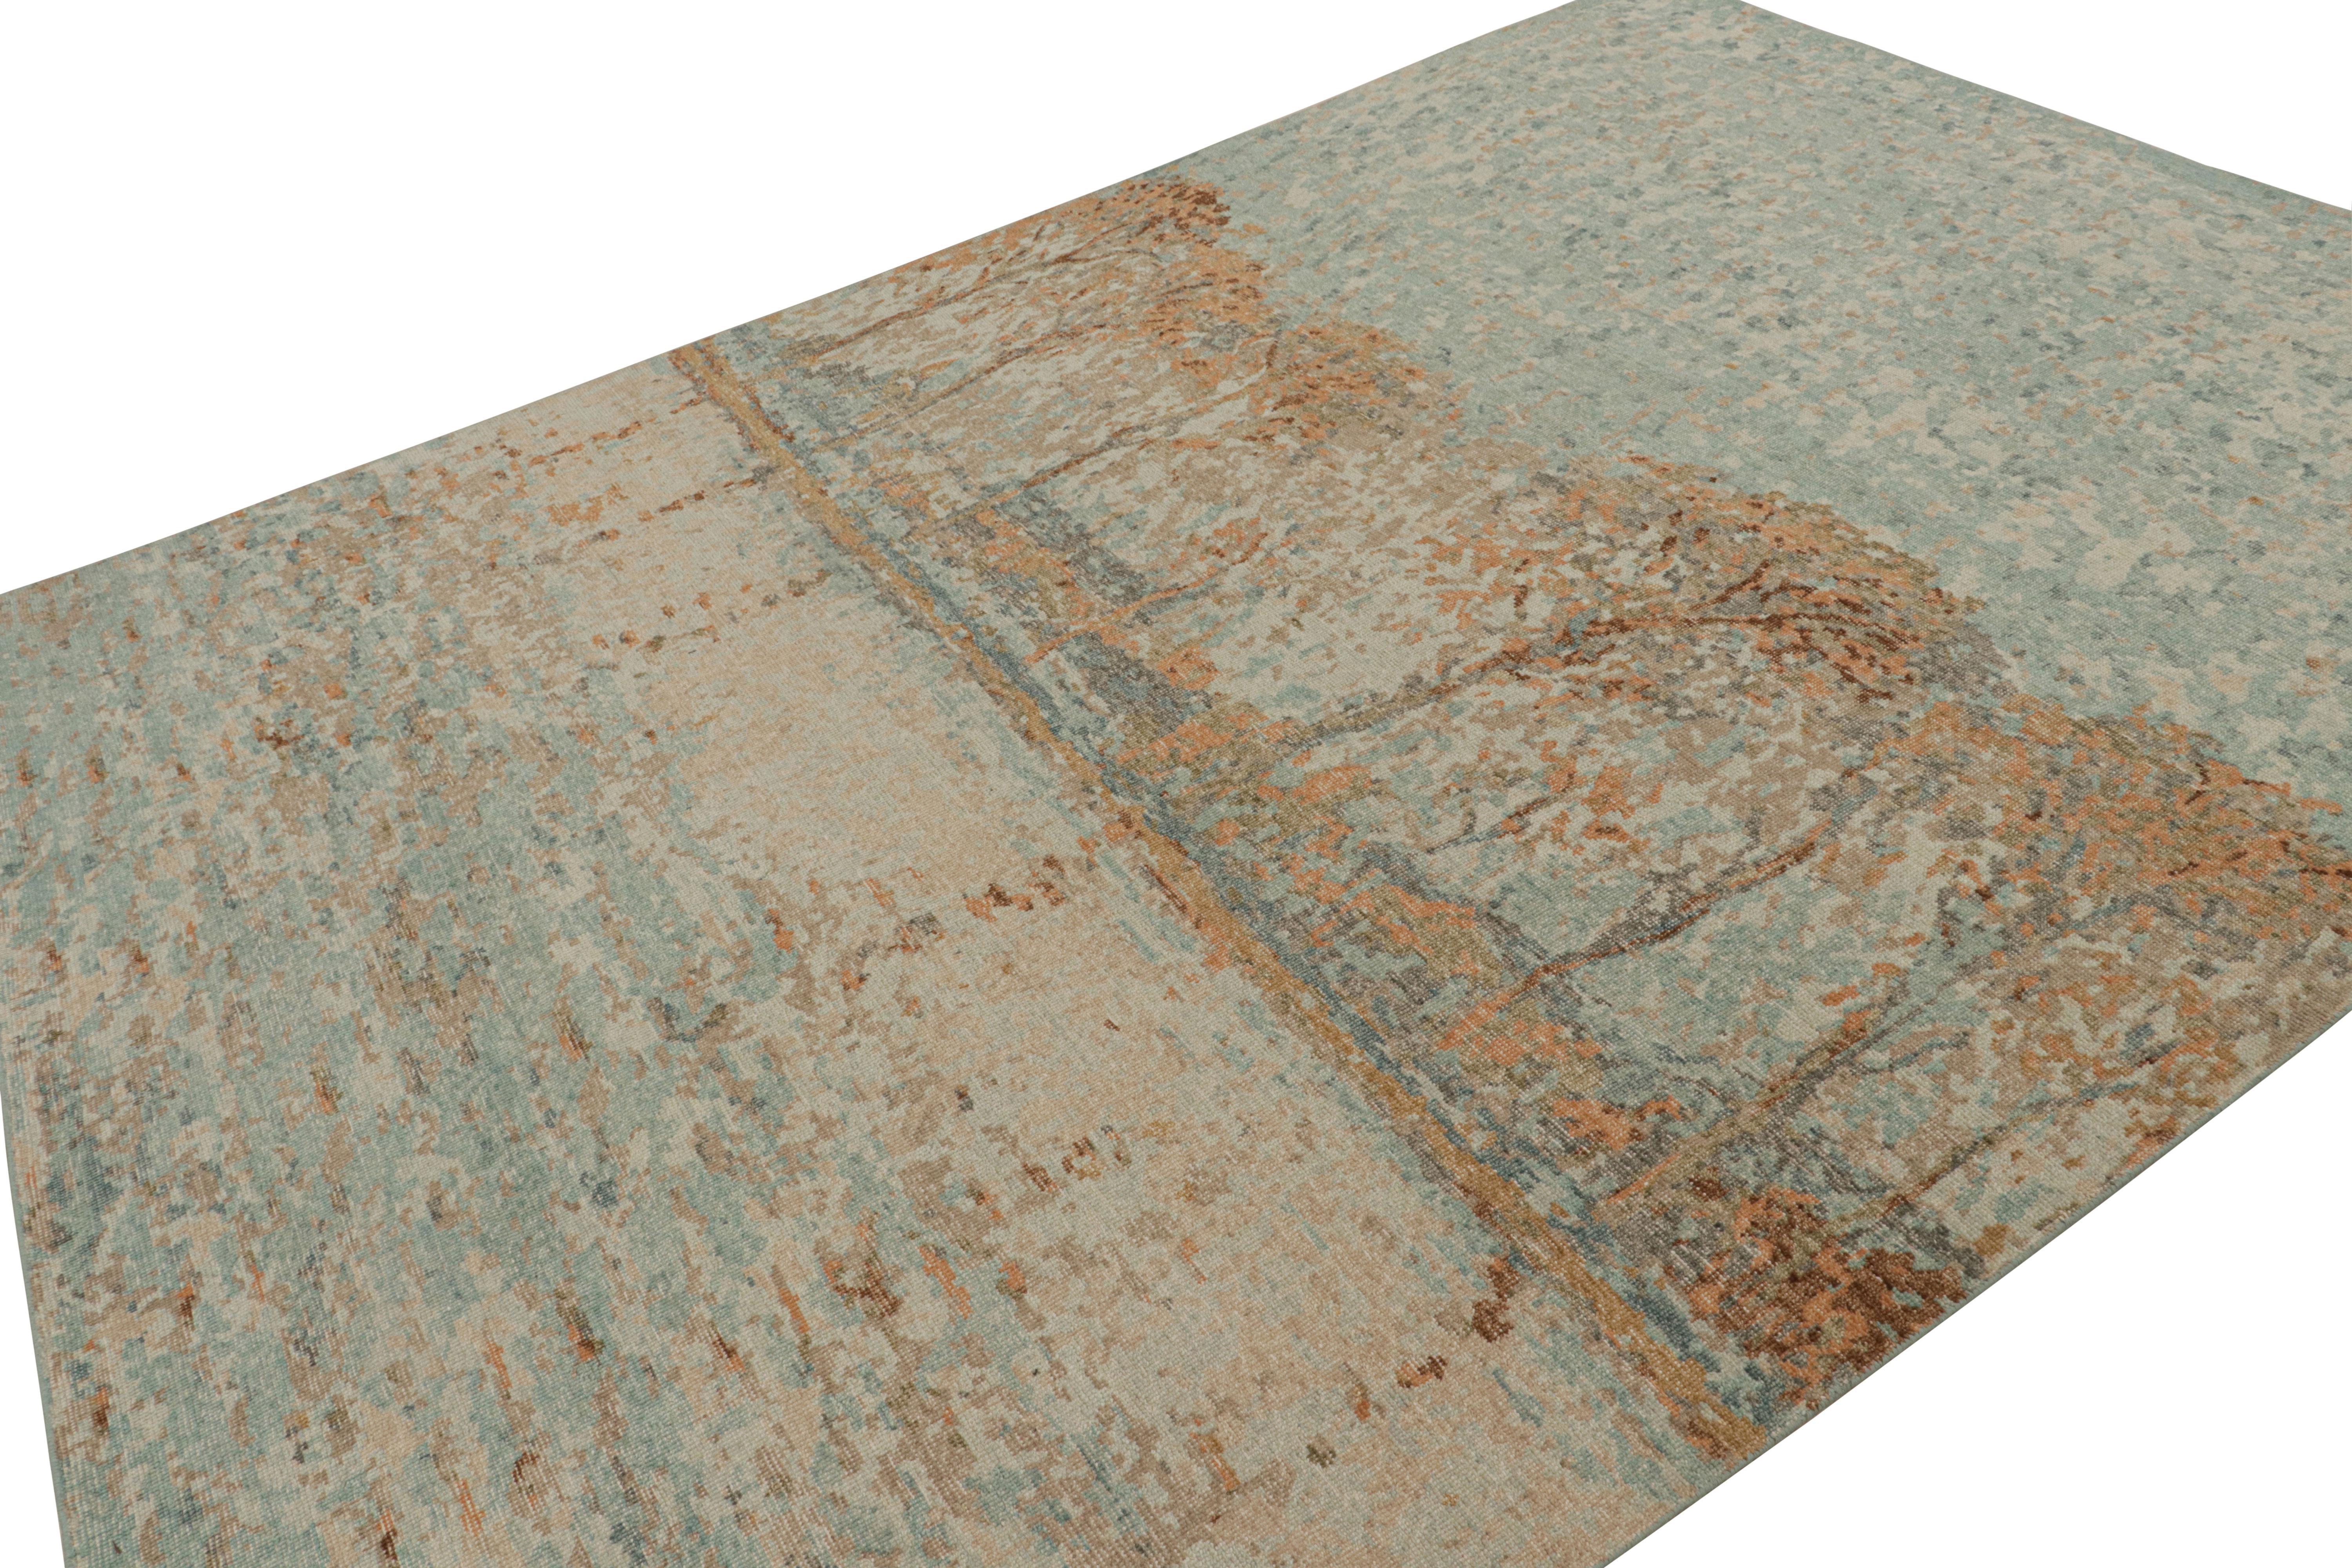 Hand-knotted in wool, this 9x12 distressed style modern rug is from Rug & Kilim’s Homage collection.

On the Design:

This piece features a forest-lake pictorial in blue and amber tones. Connoisseurs may further admire the distressed look